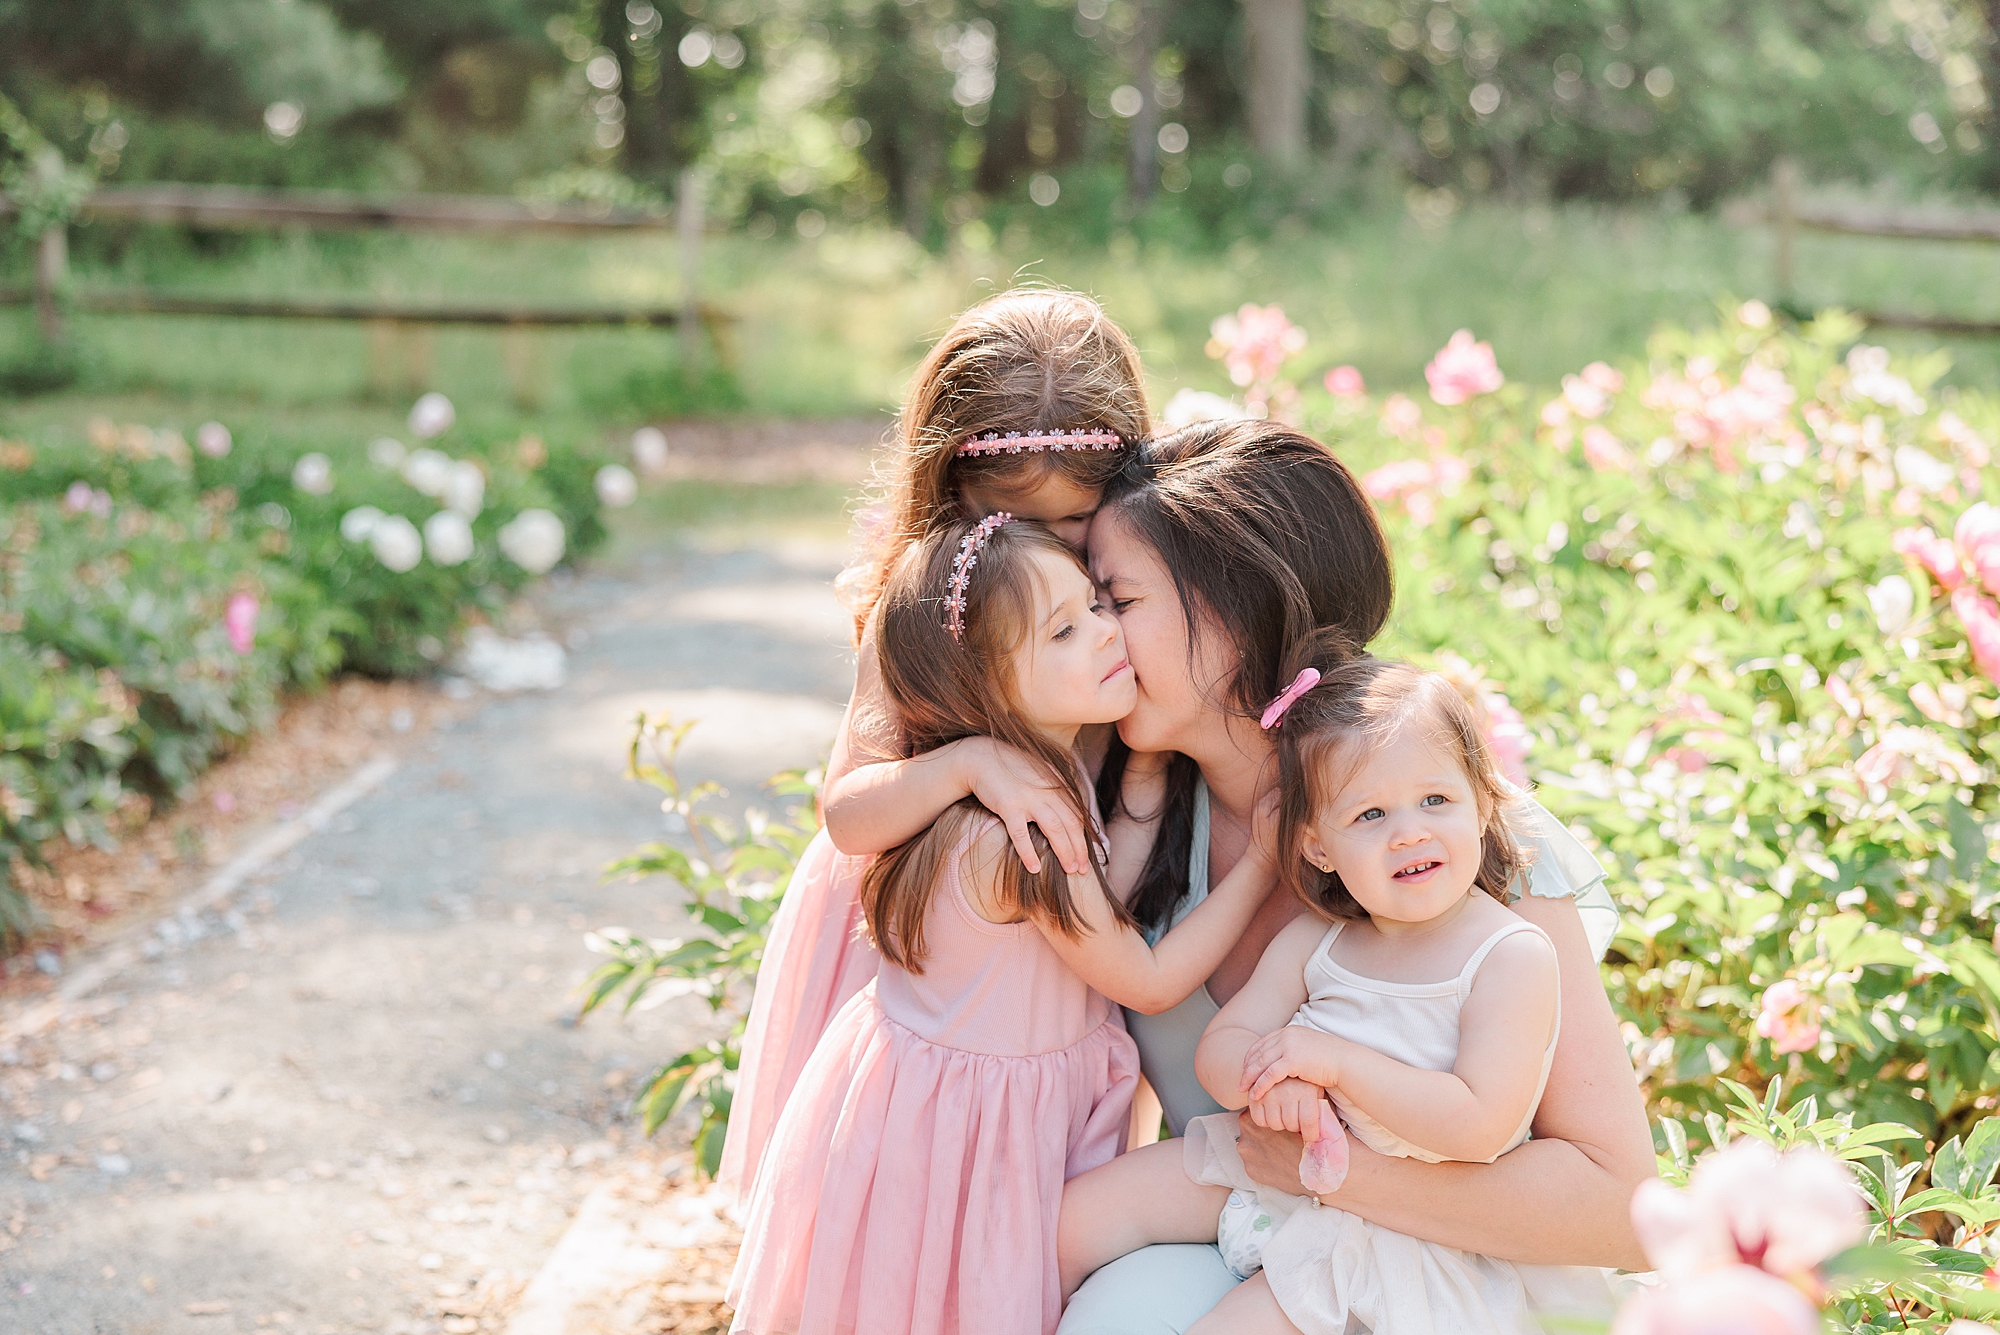 mom kisses daughter on the cheek while other daughters hug her